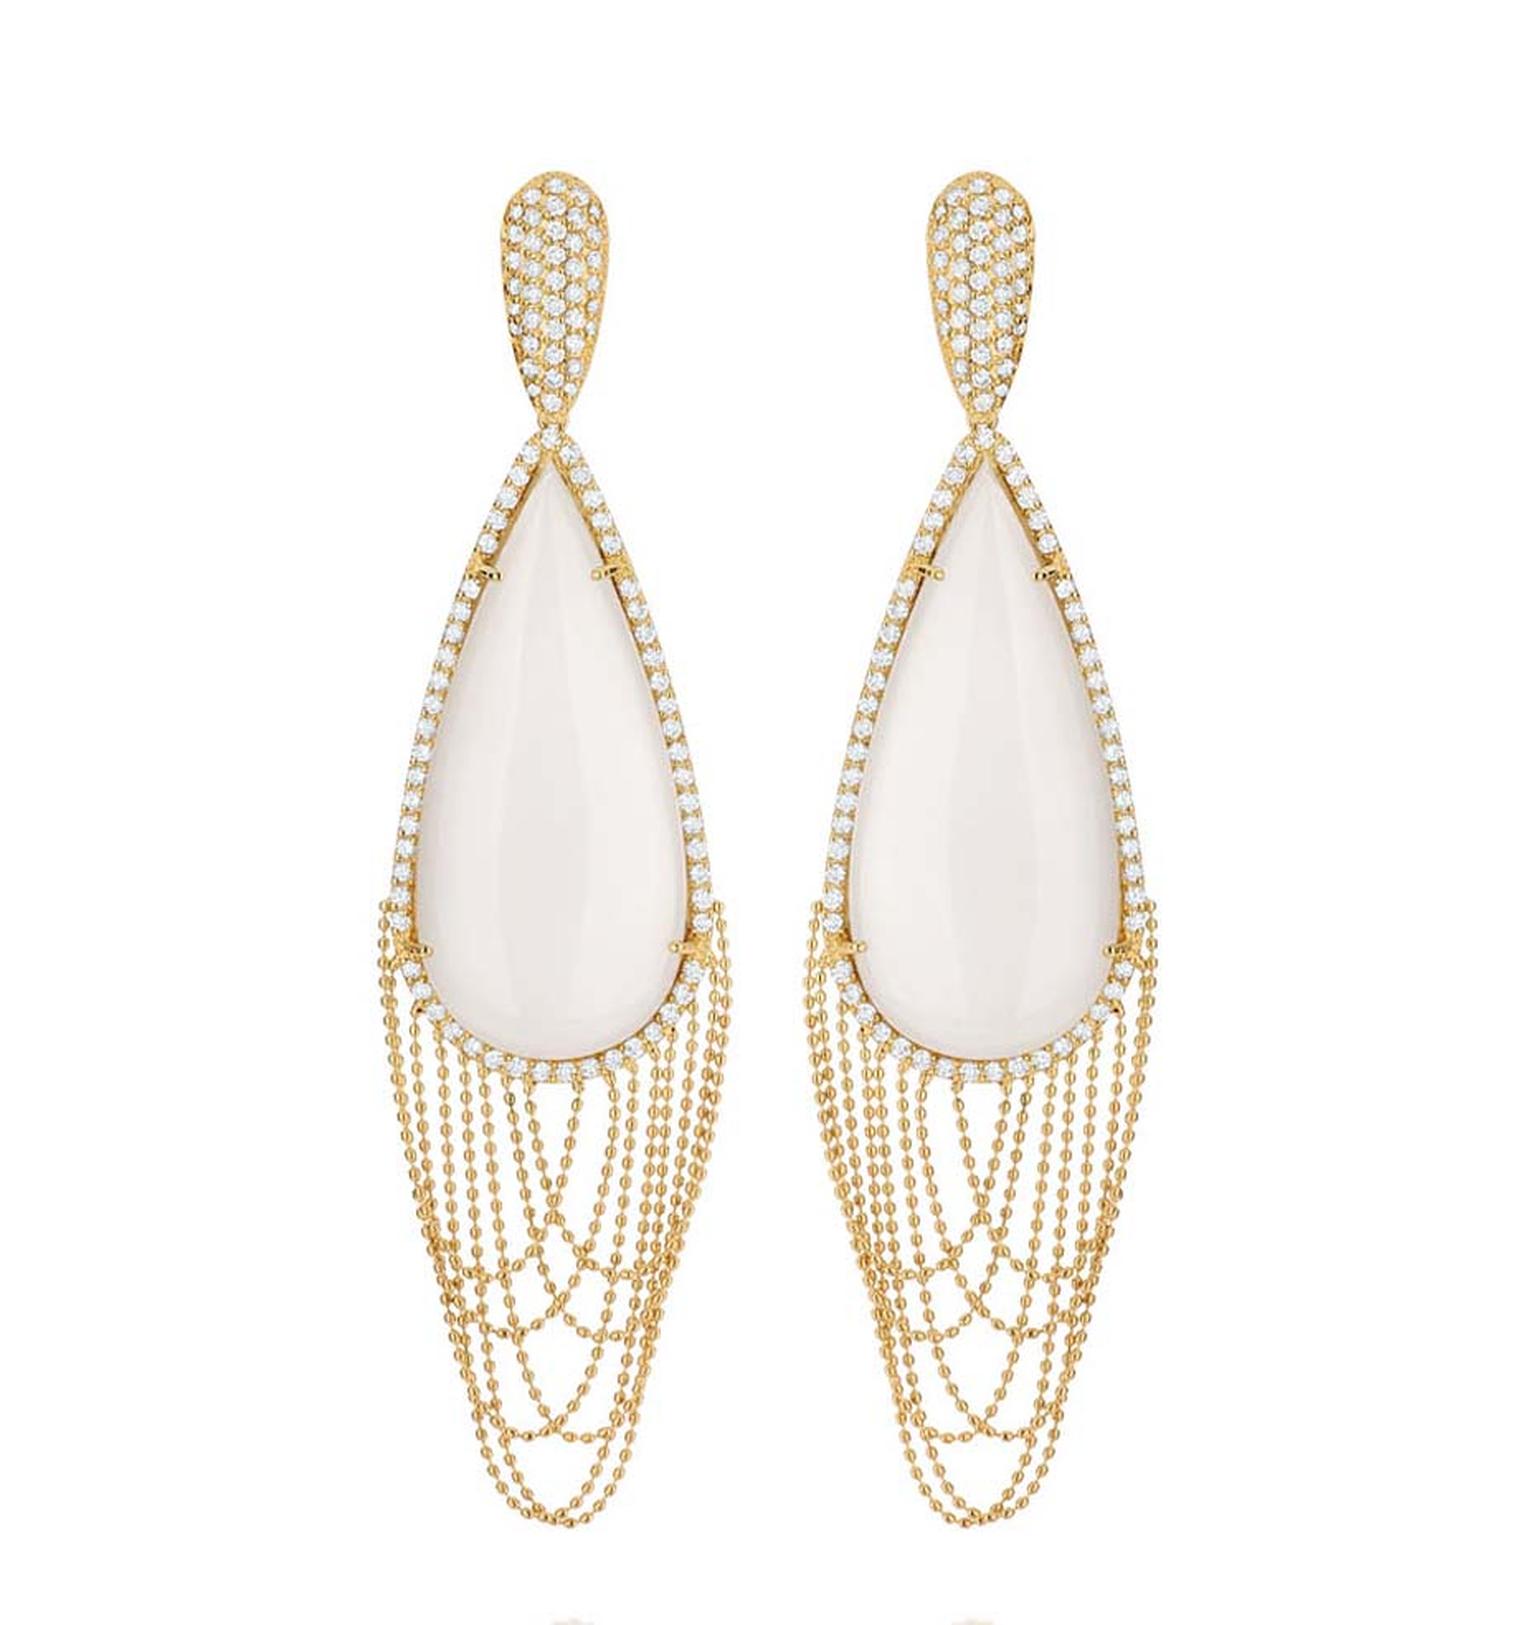 Carla Amorim Breeze earrings from the Pantone collection.